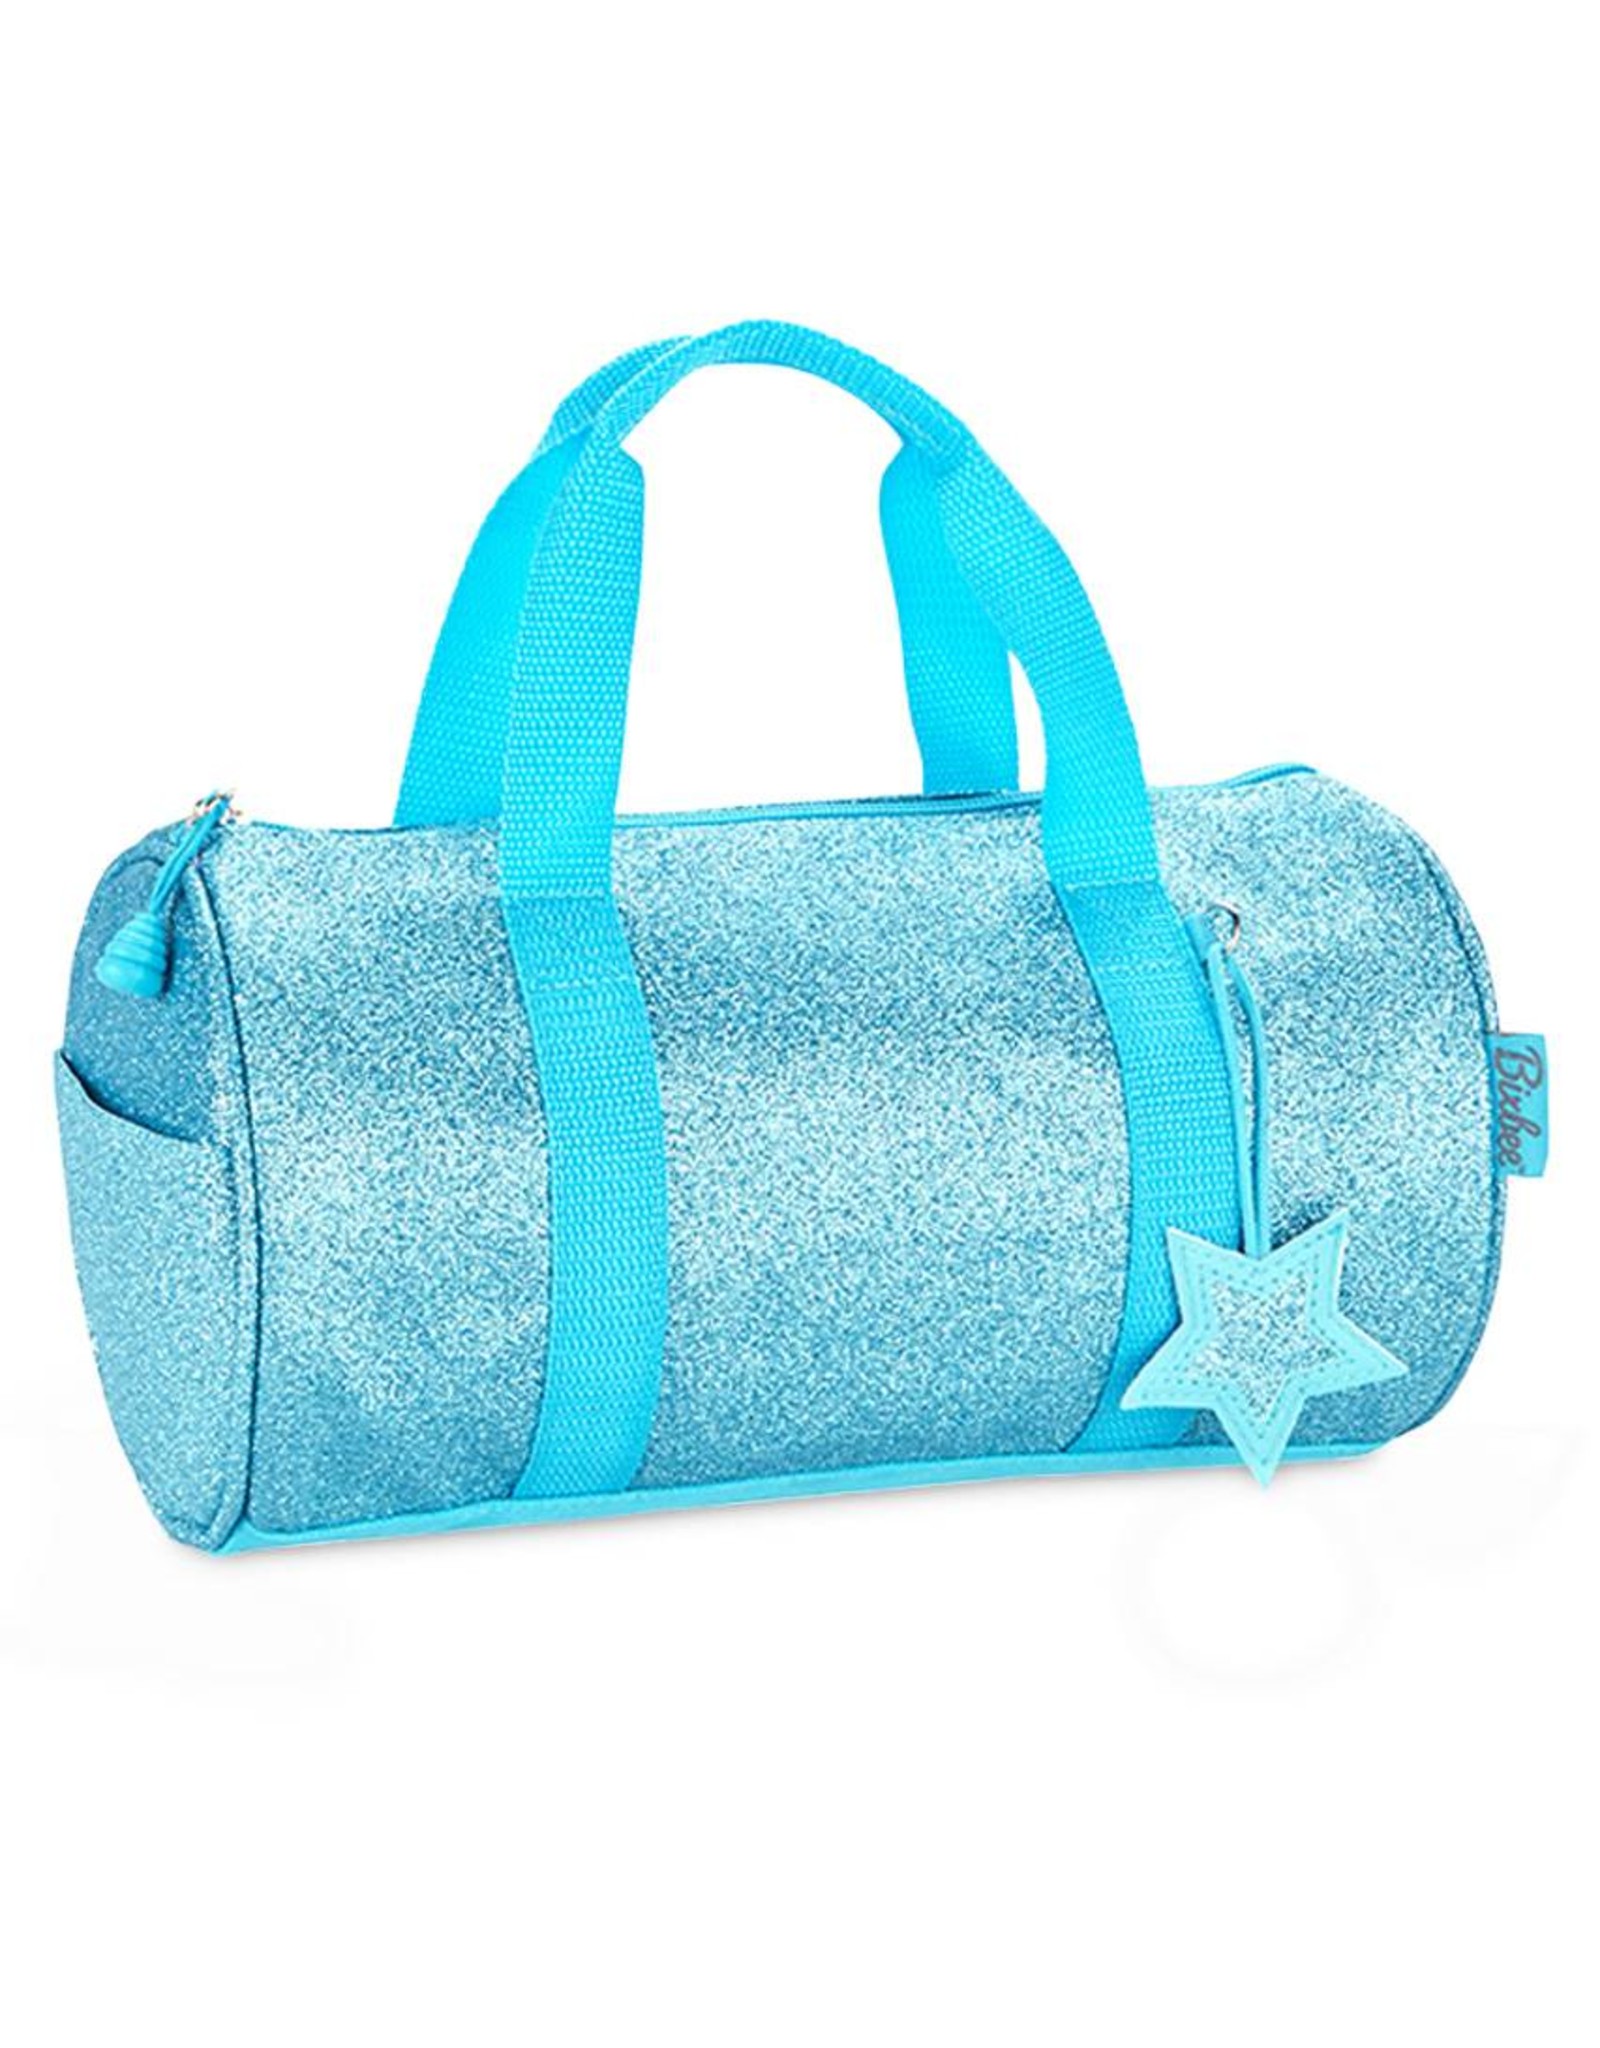 Bixbee Sparkalicious Small  Duffle (Turquoise)          -